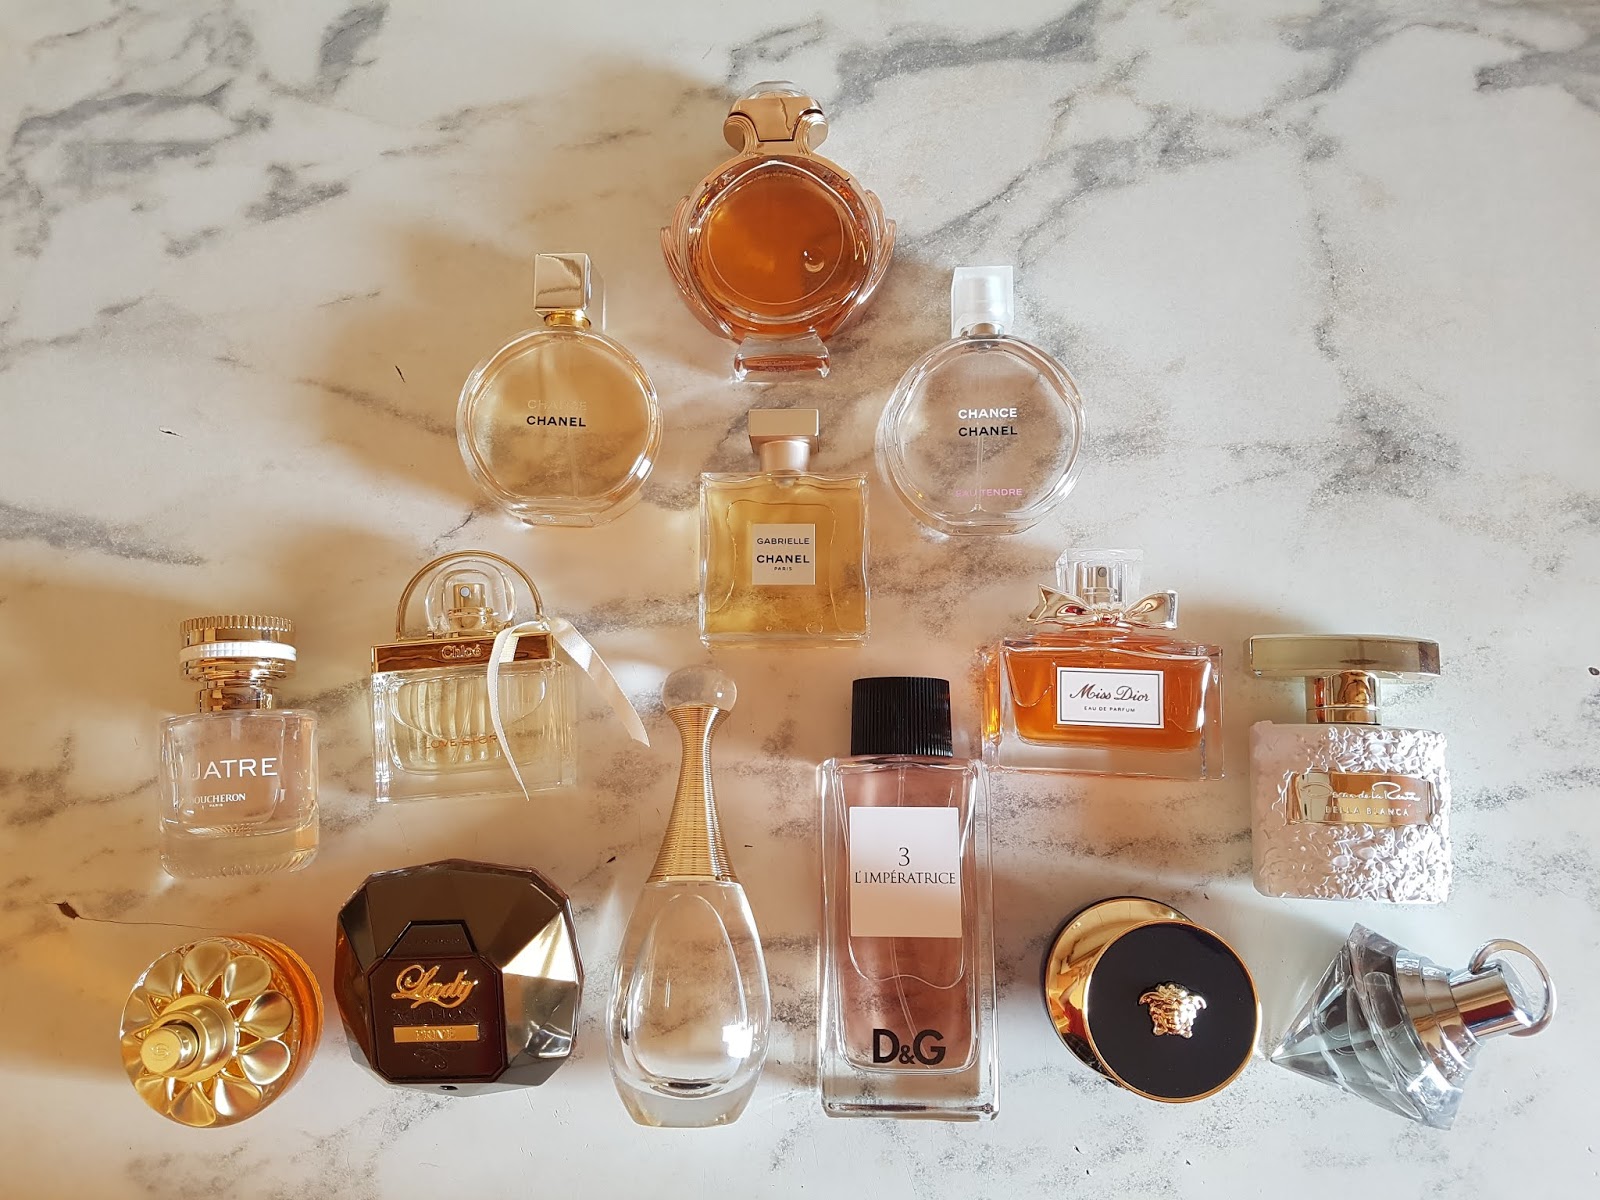 exhibition Archives - The Perfume Society